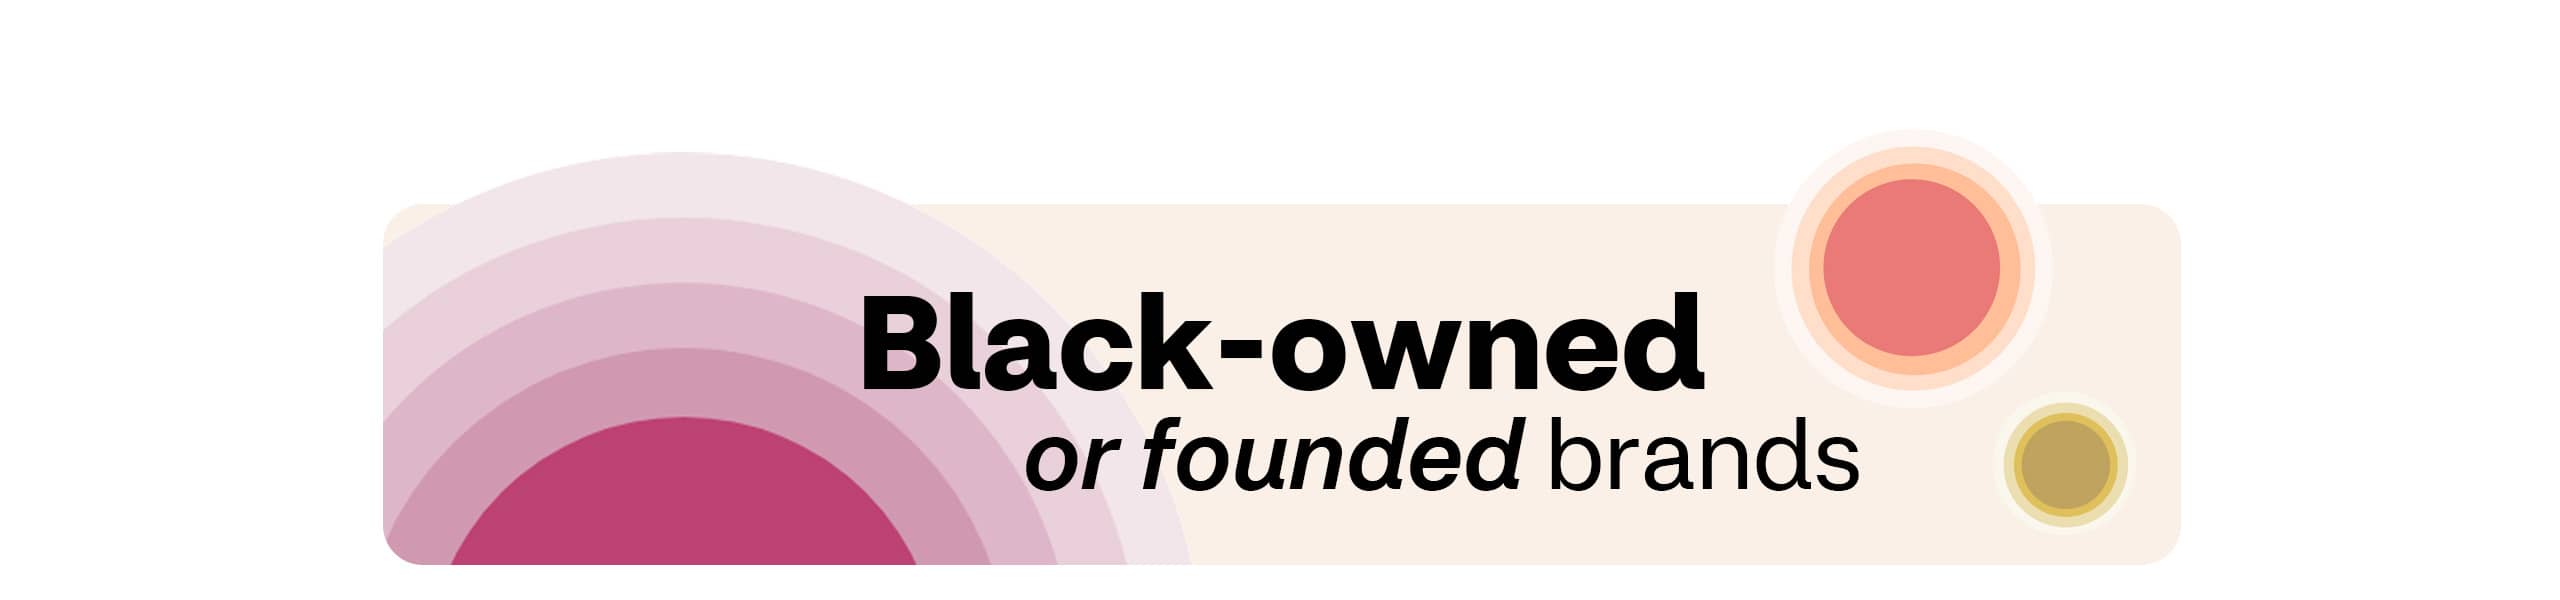 Black-owned or founded brands